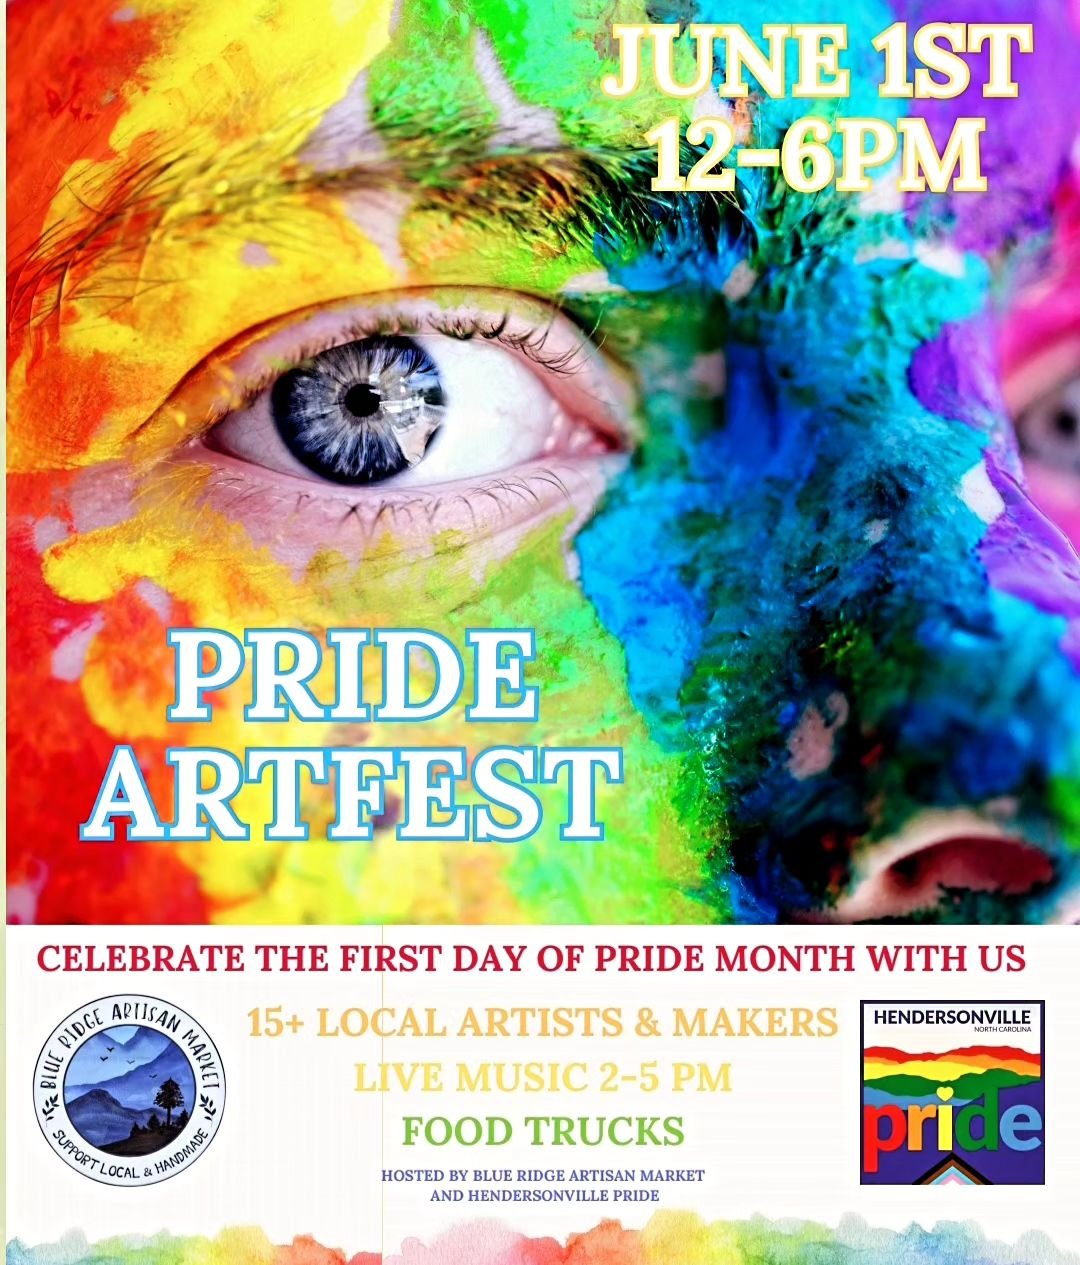 Come join us for art and entertainment!!

17 local LGBTQ+ Artists!!

Live Music 2:00-5:00

Food trucks on site